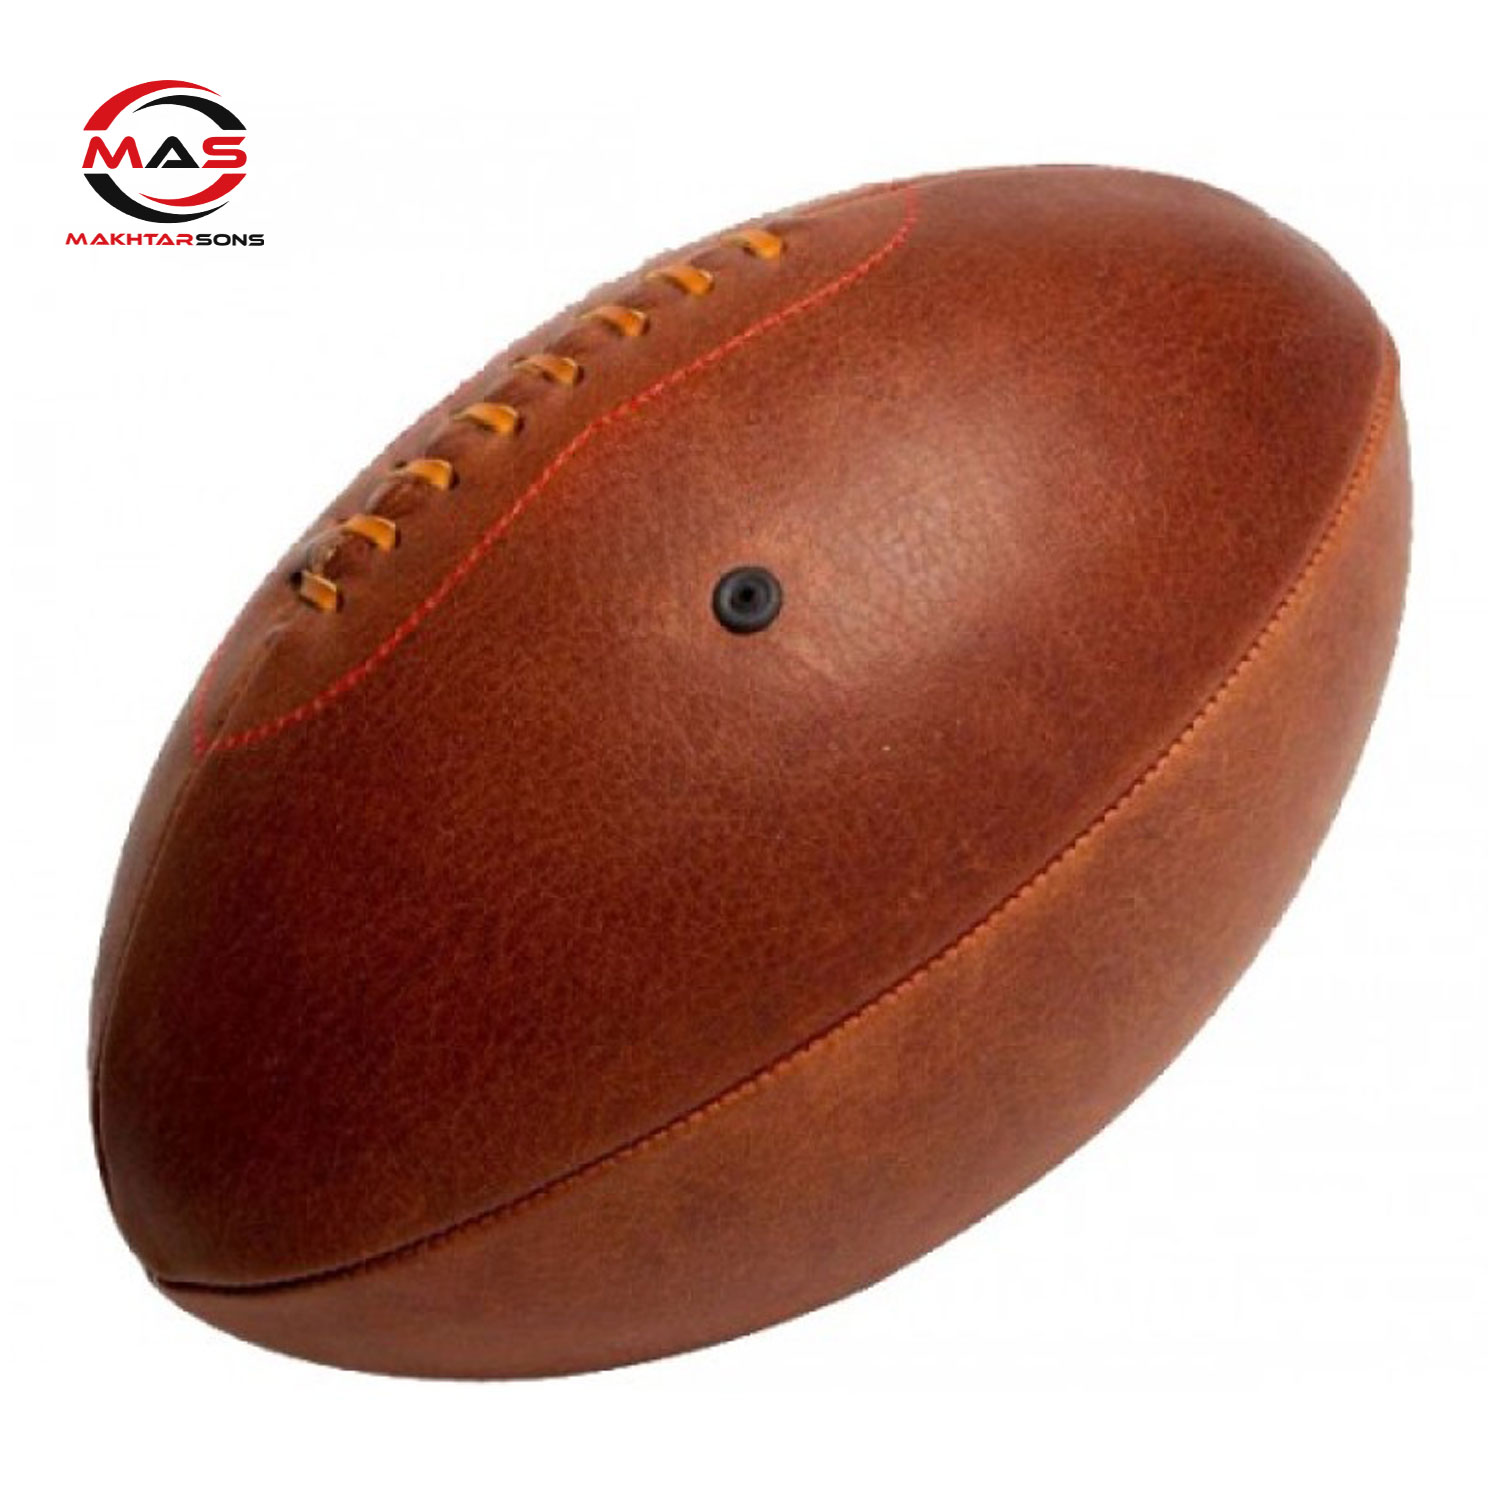 RUGBY BALL | MAS 429